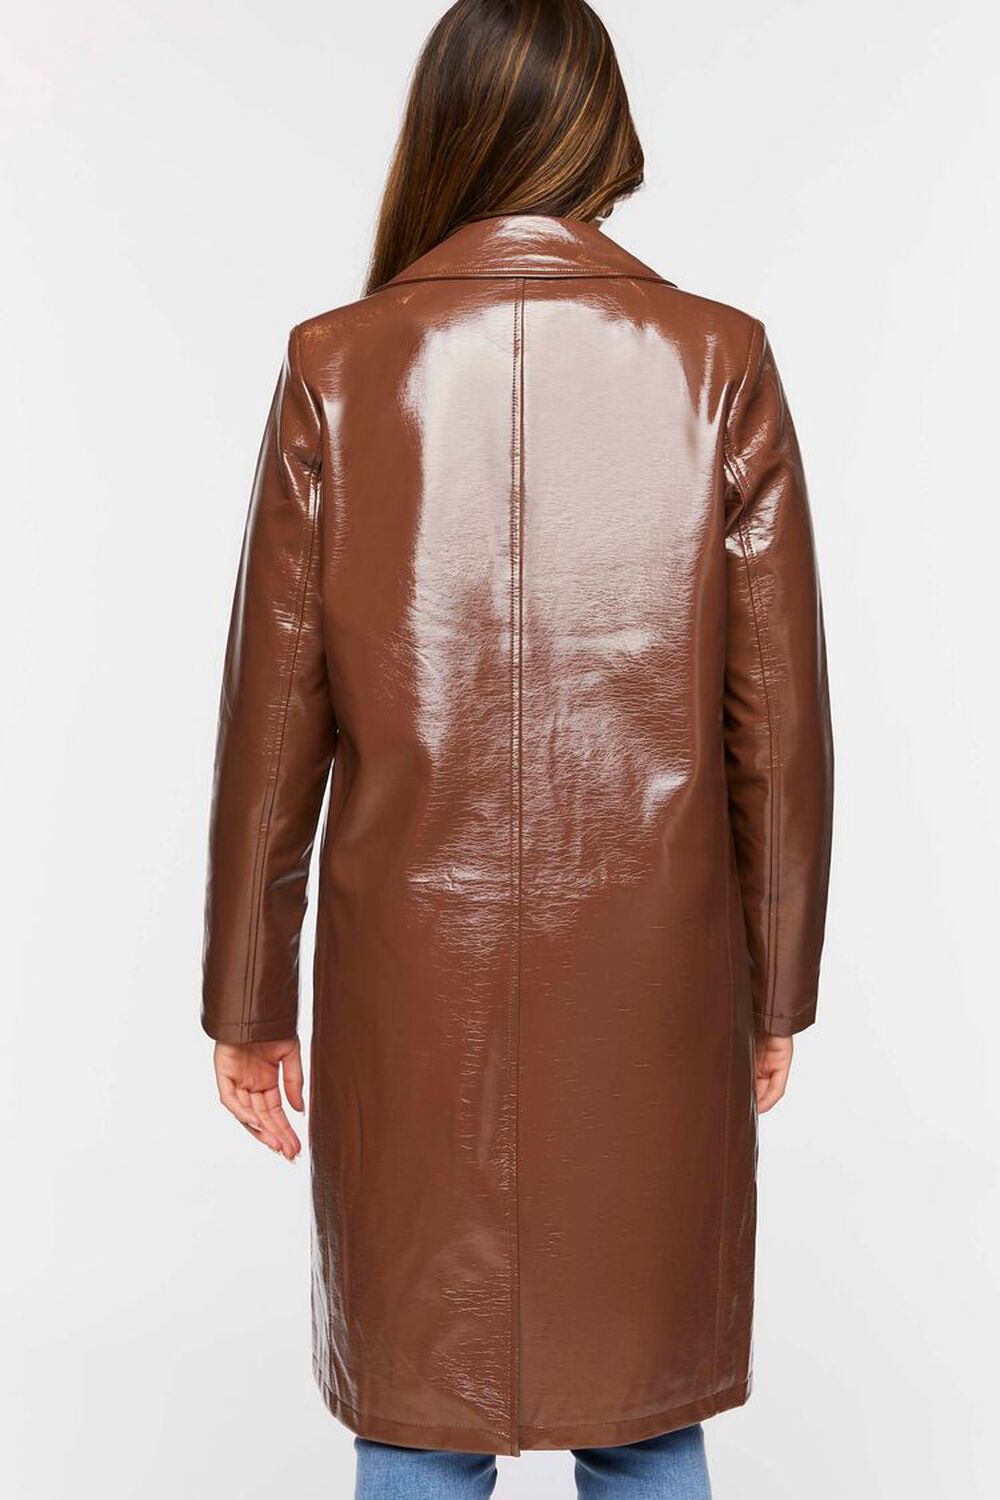 TURKISH COFFEE Faux Patent Leather Trench Coat, image 3